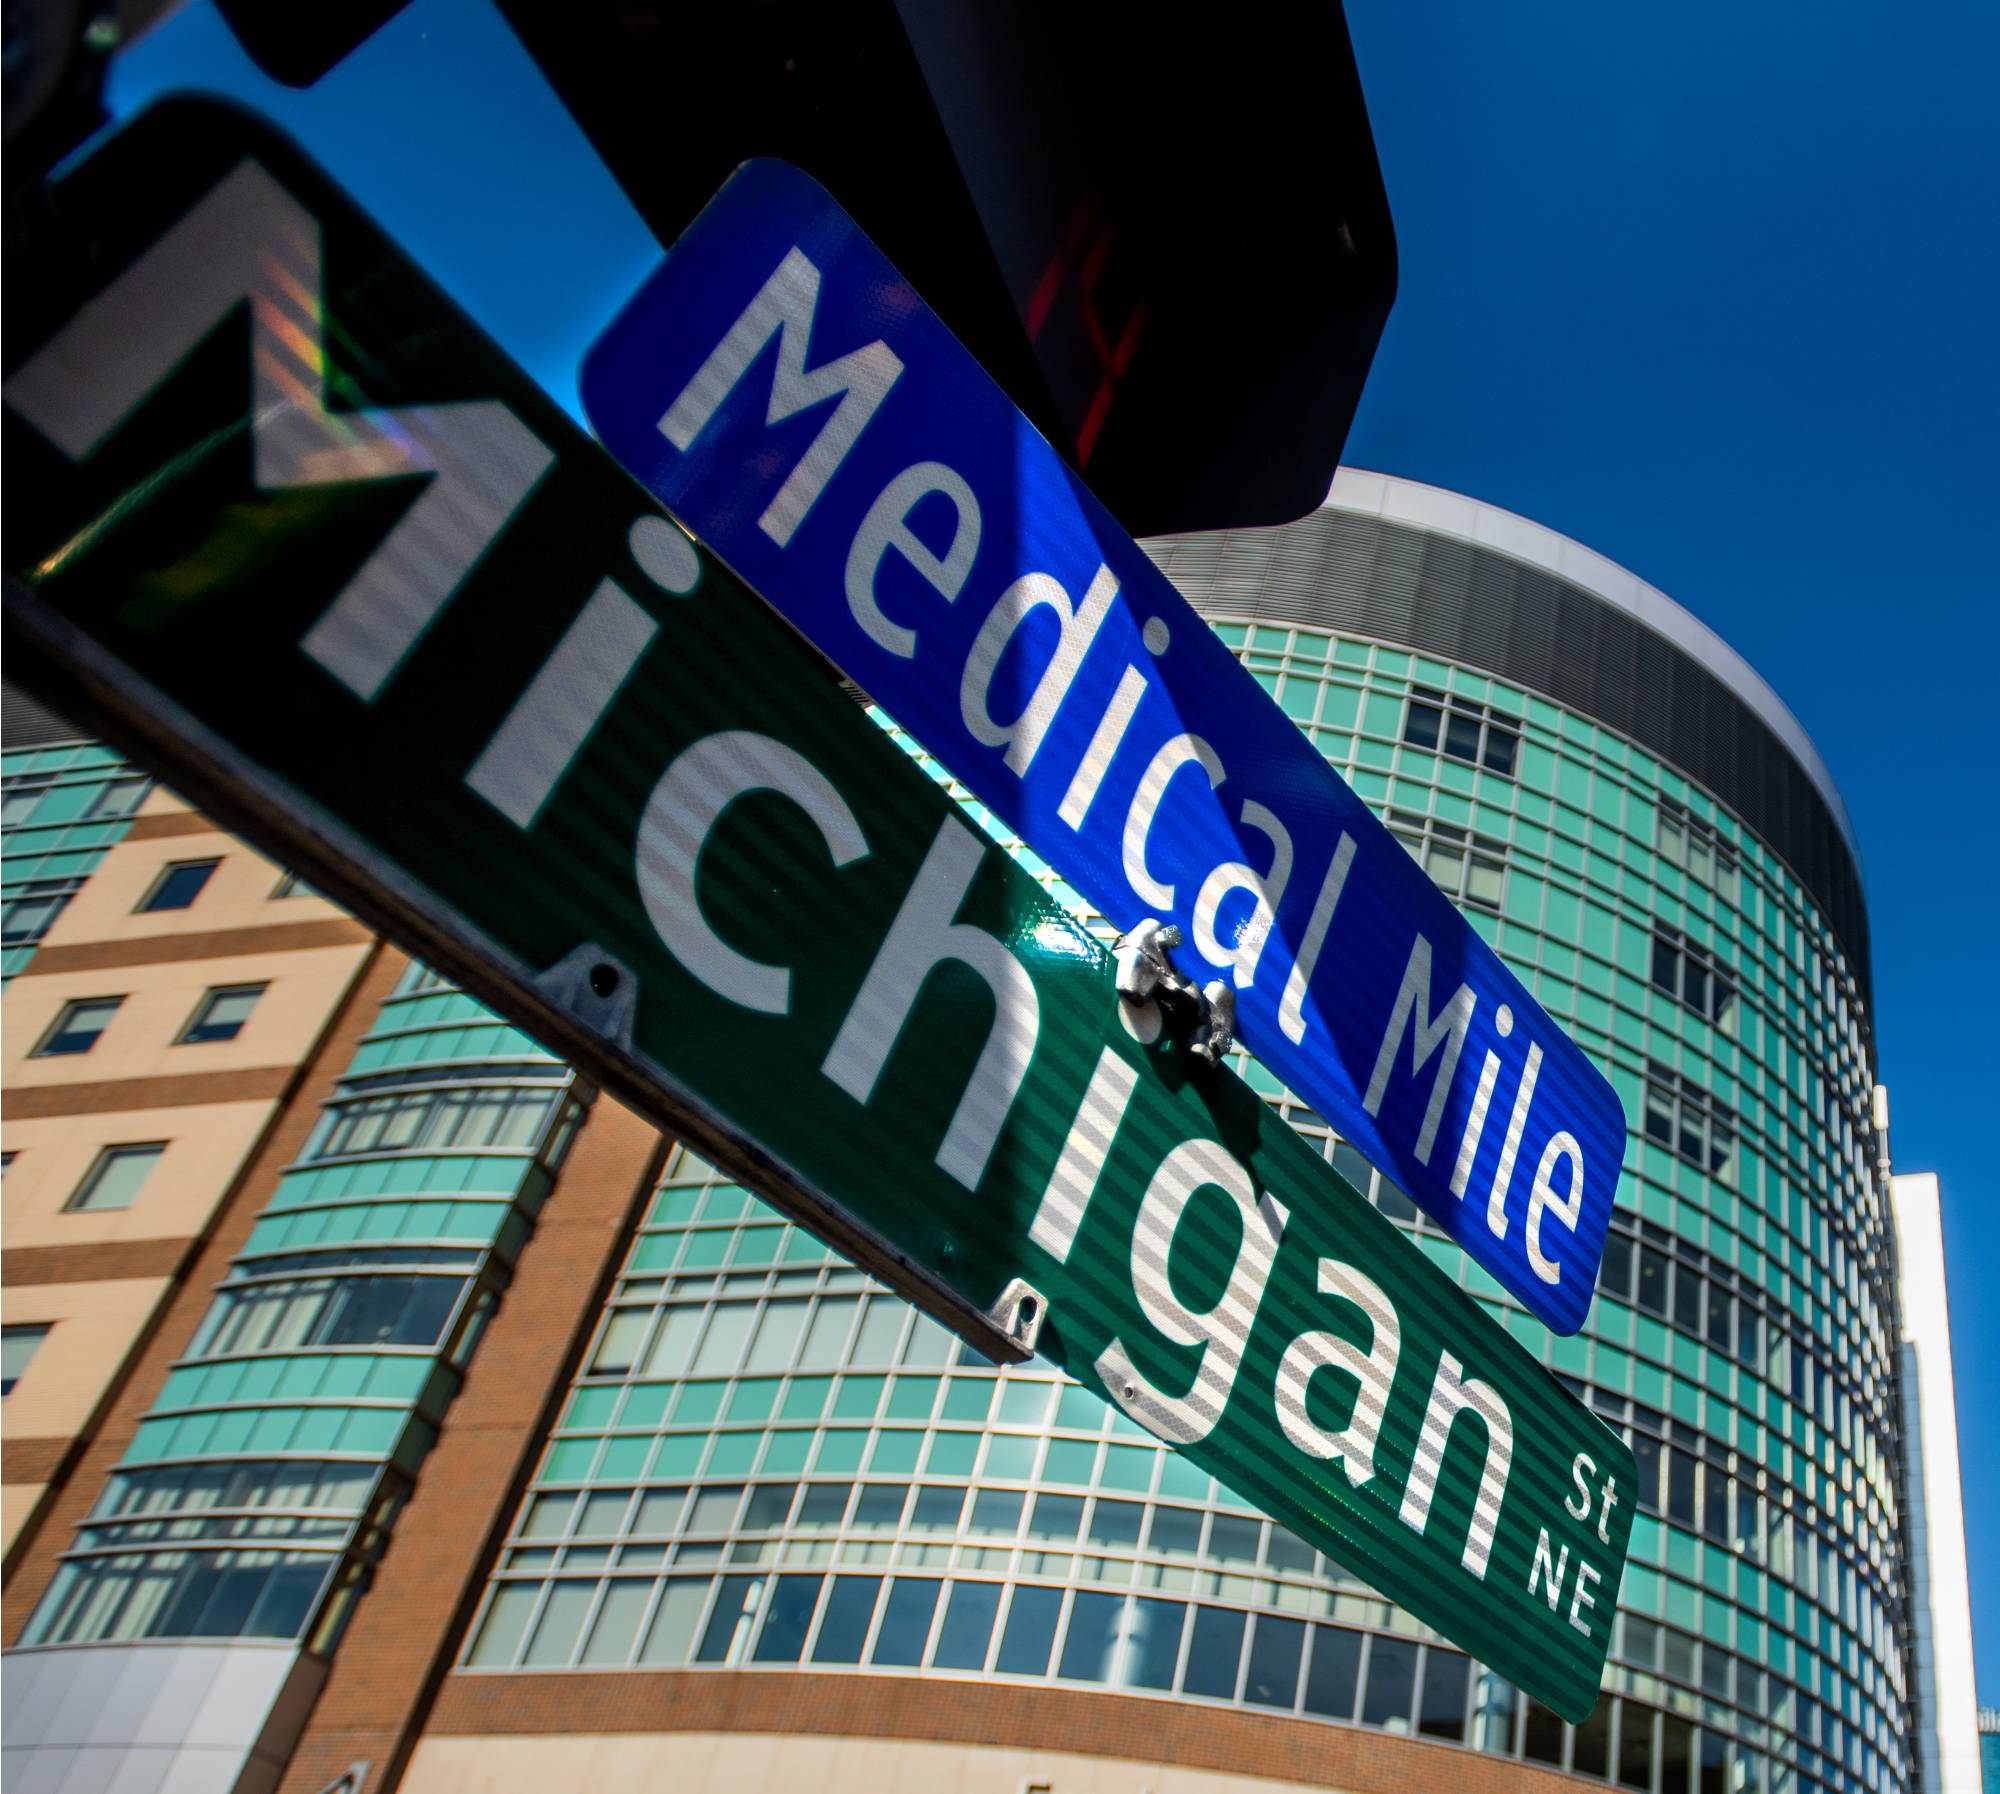 Close up photo street signs listing "Michigan Street NE" and "Medical Mile", with a medical building in the distance.